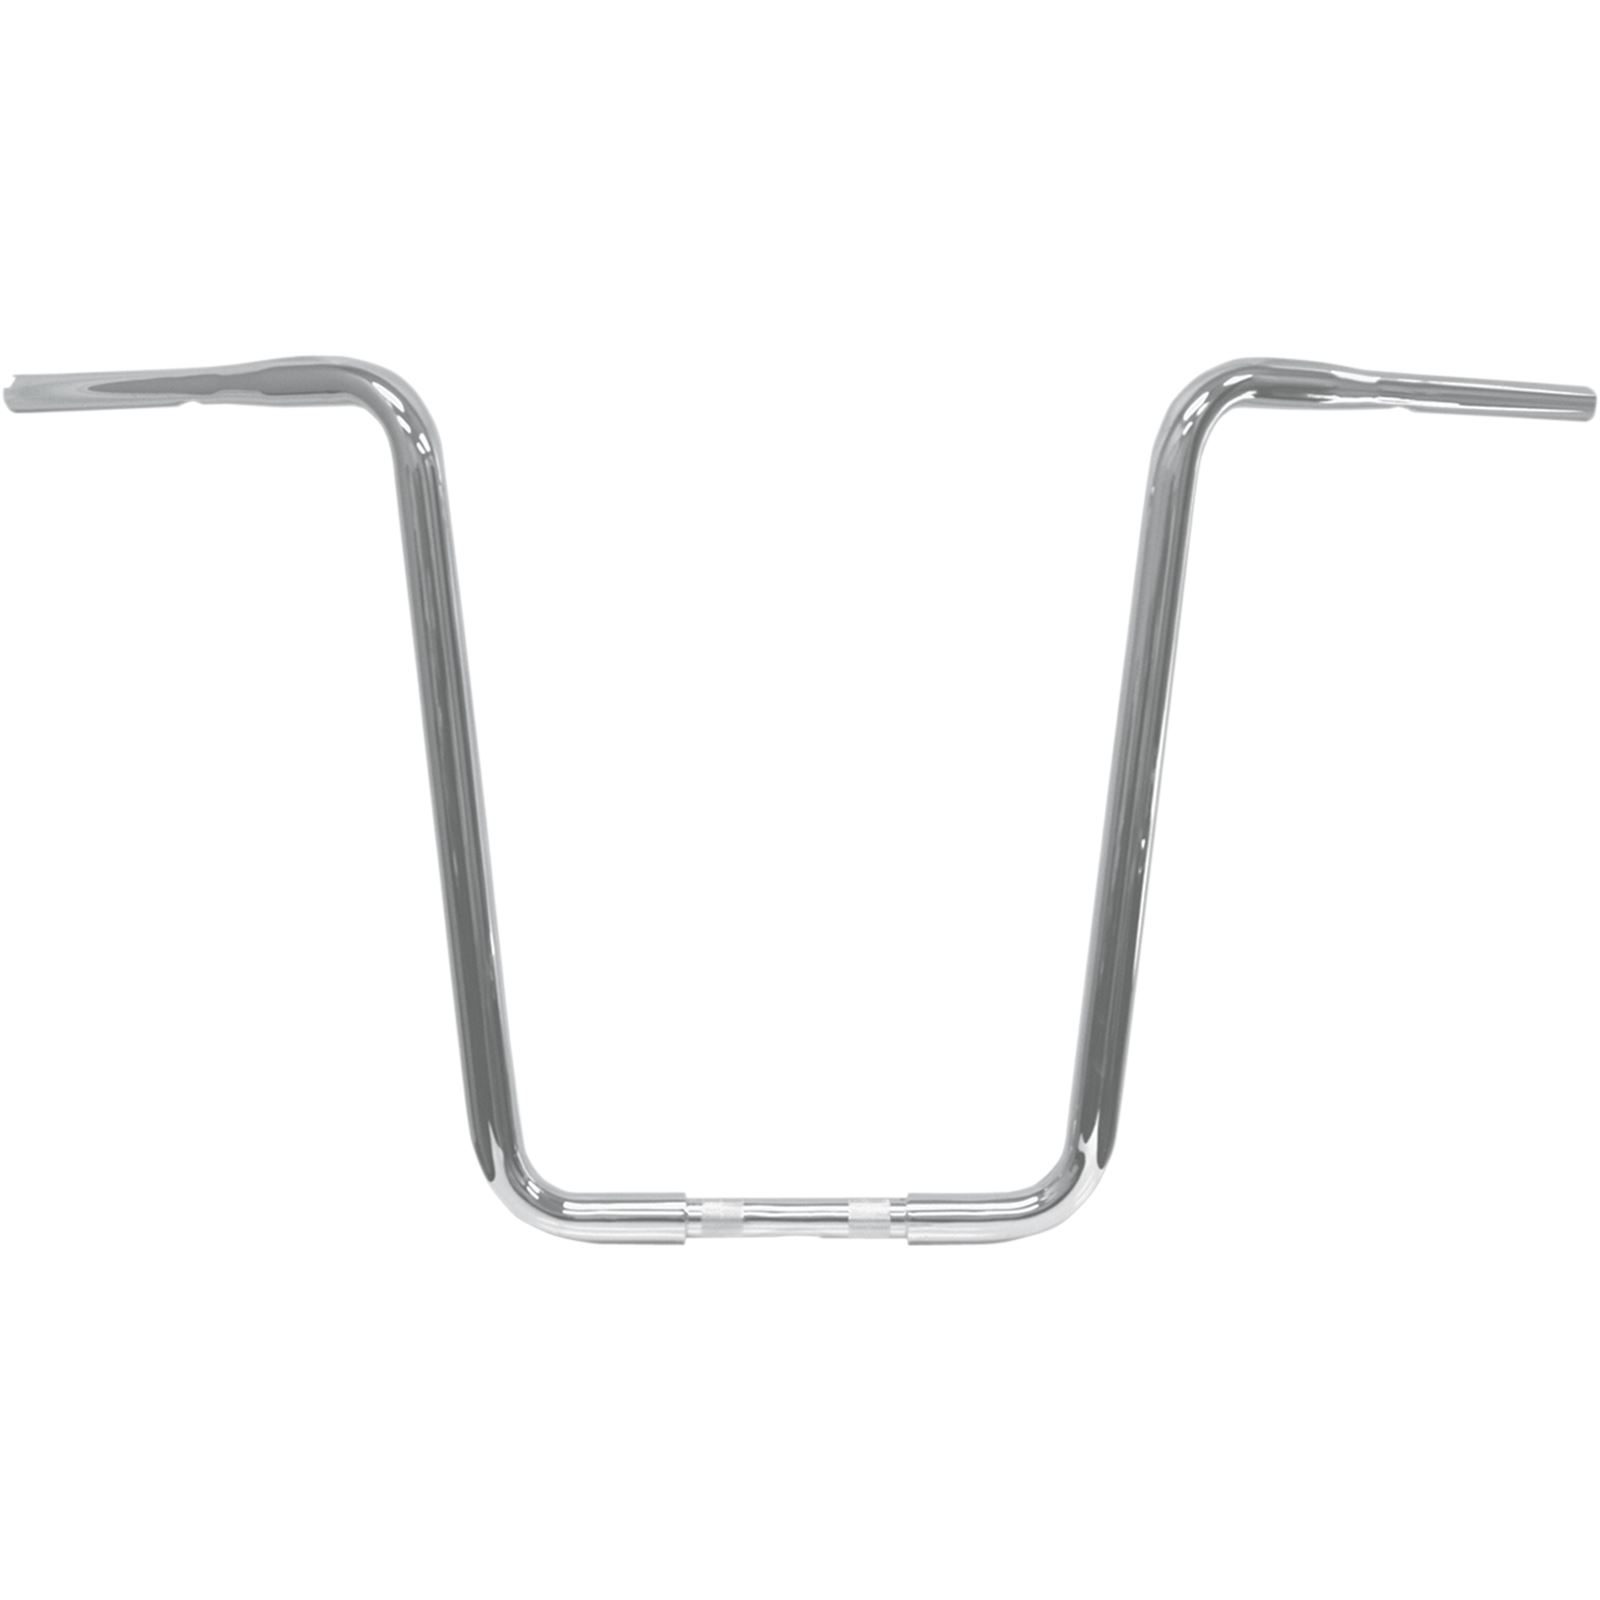 LA Choppers Chrome 20" Ape Hanger Handlebar for Throttle-by-Wire